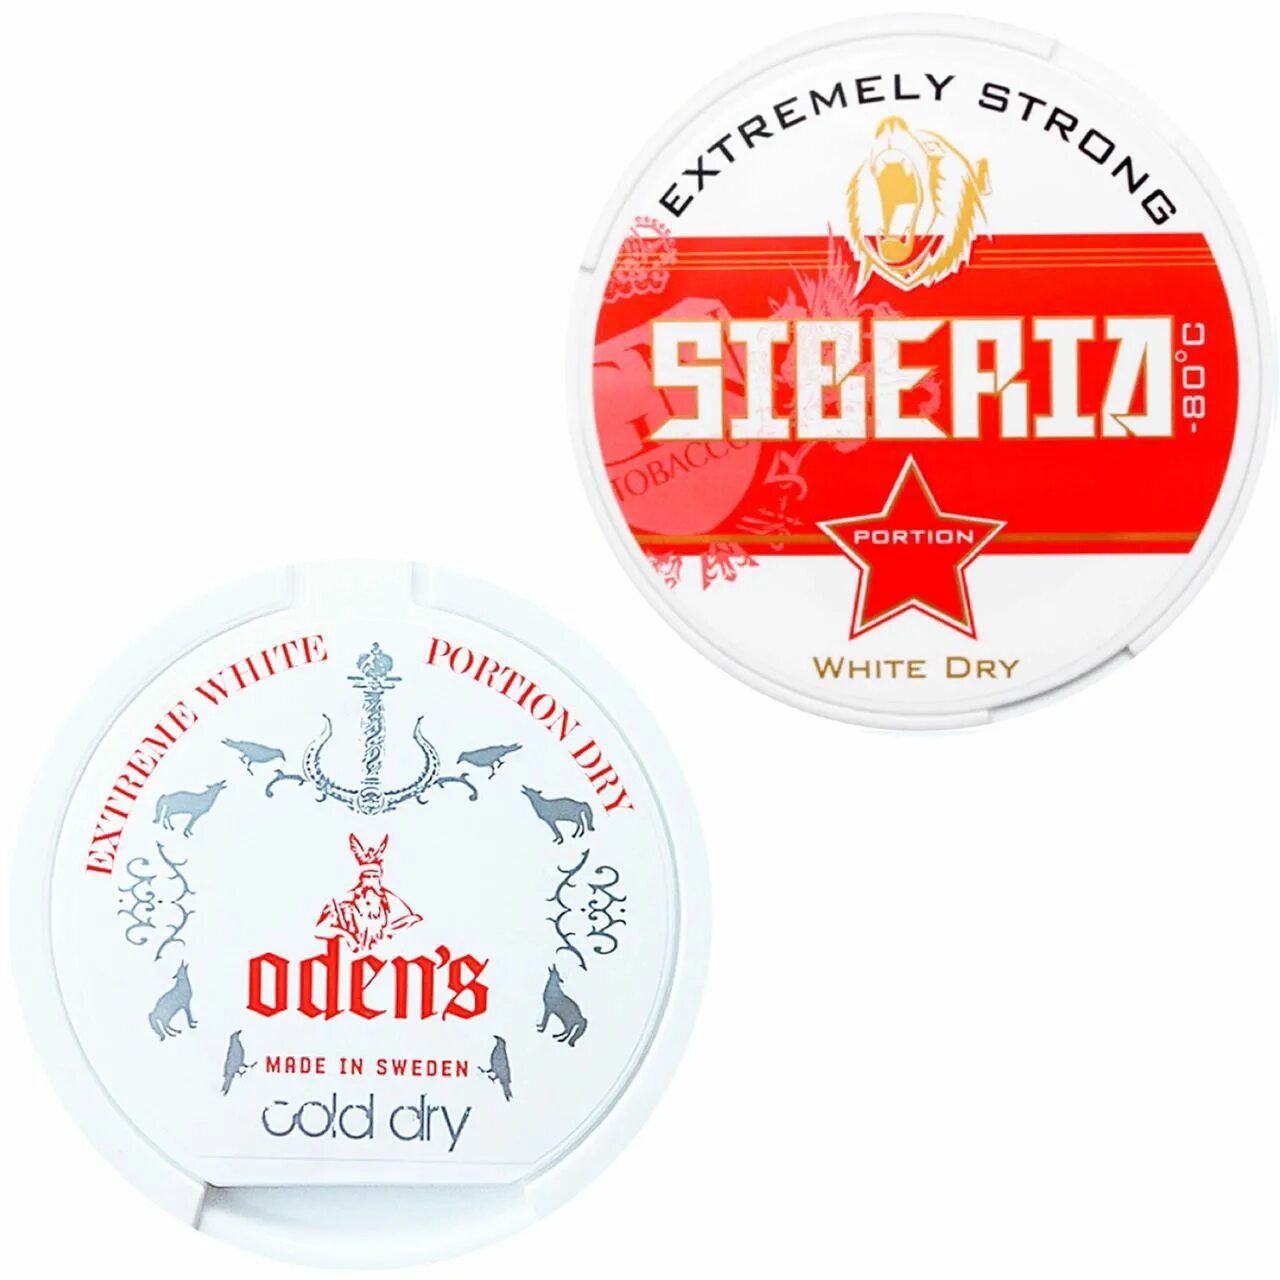 Odens Cold Dry 16 гр.. Odens Cold Dry Classic 50г. Снюс Oden's Cold Dry. Odens Cold Dry Mini 10g. Odens cold